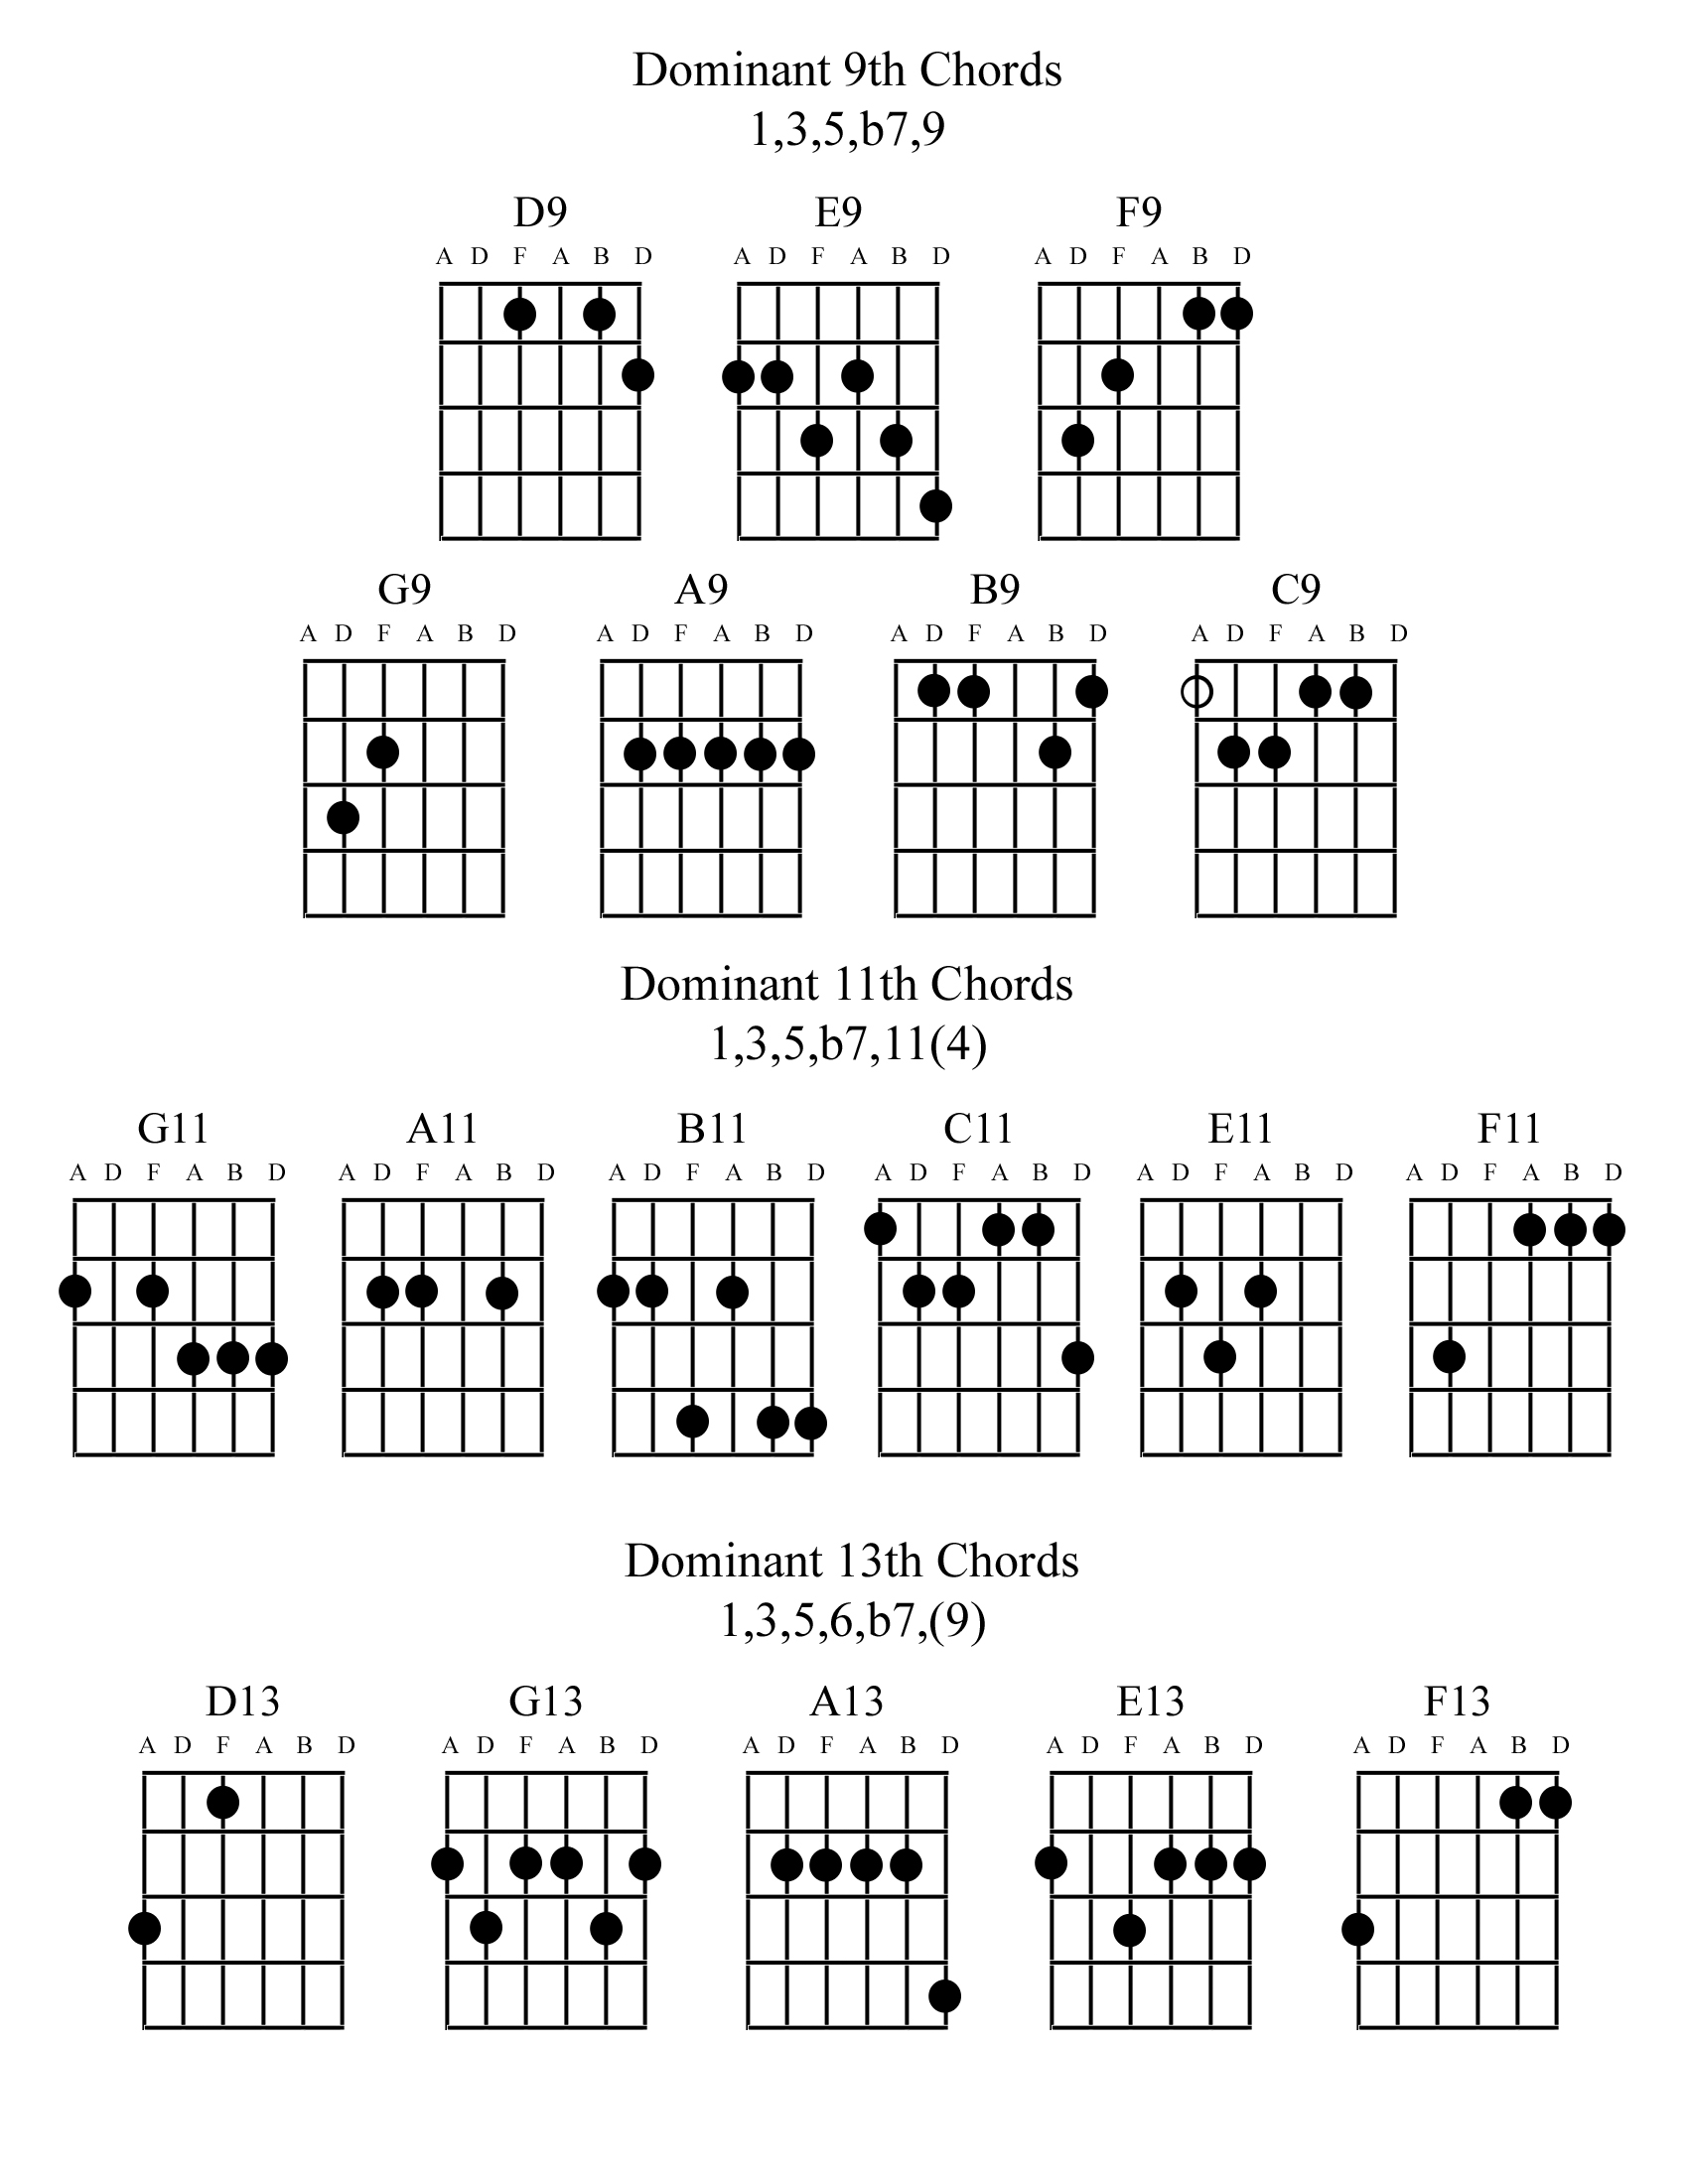 Dominant 9th, 11th and 13th chords